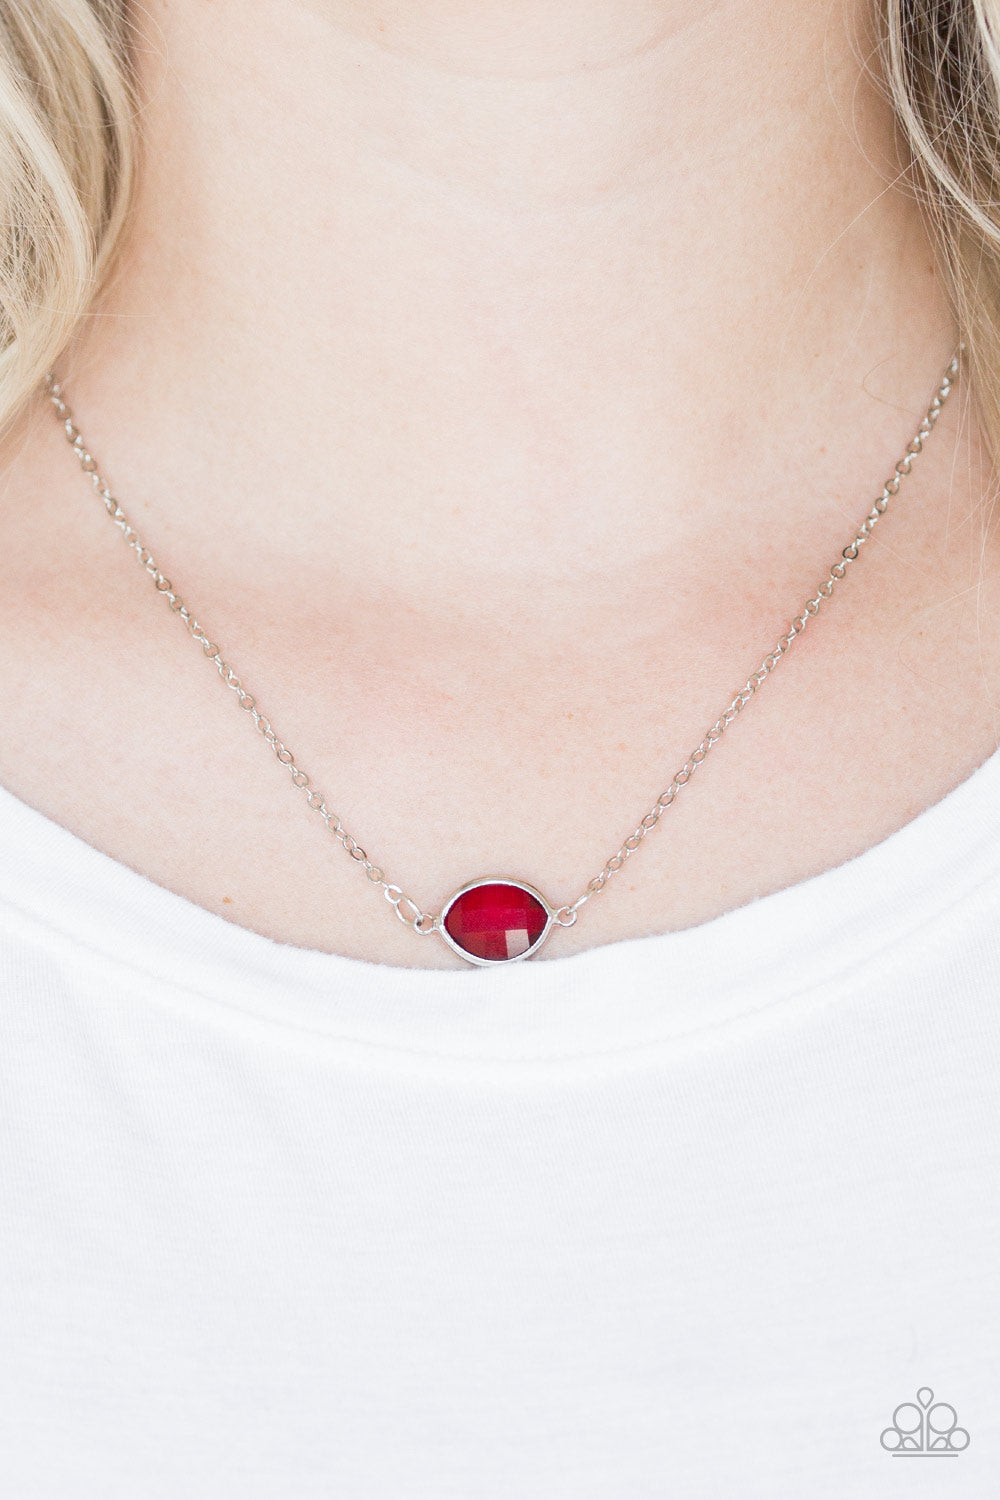 Fashionably Fantabulous - Red Necklace 2606N